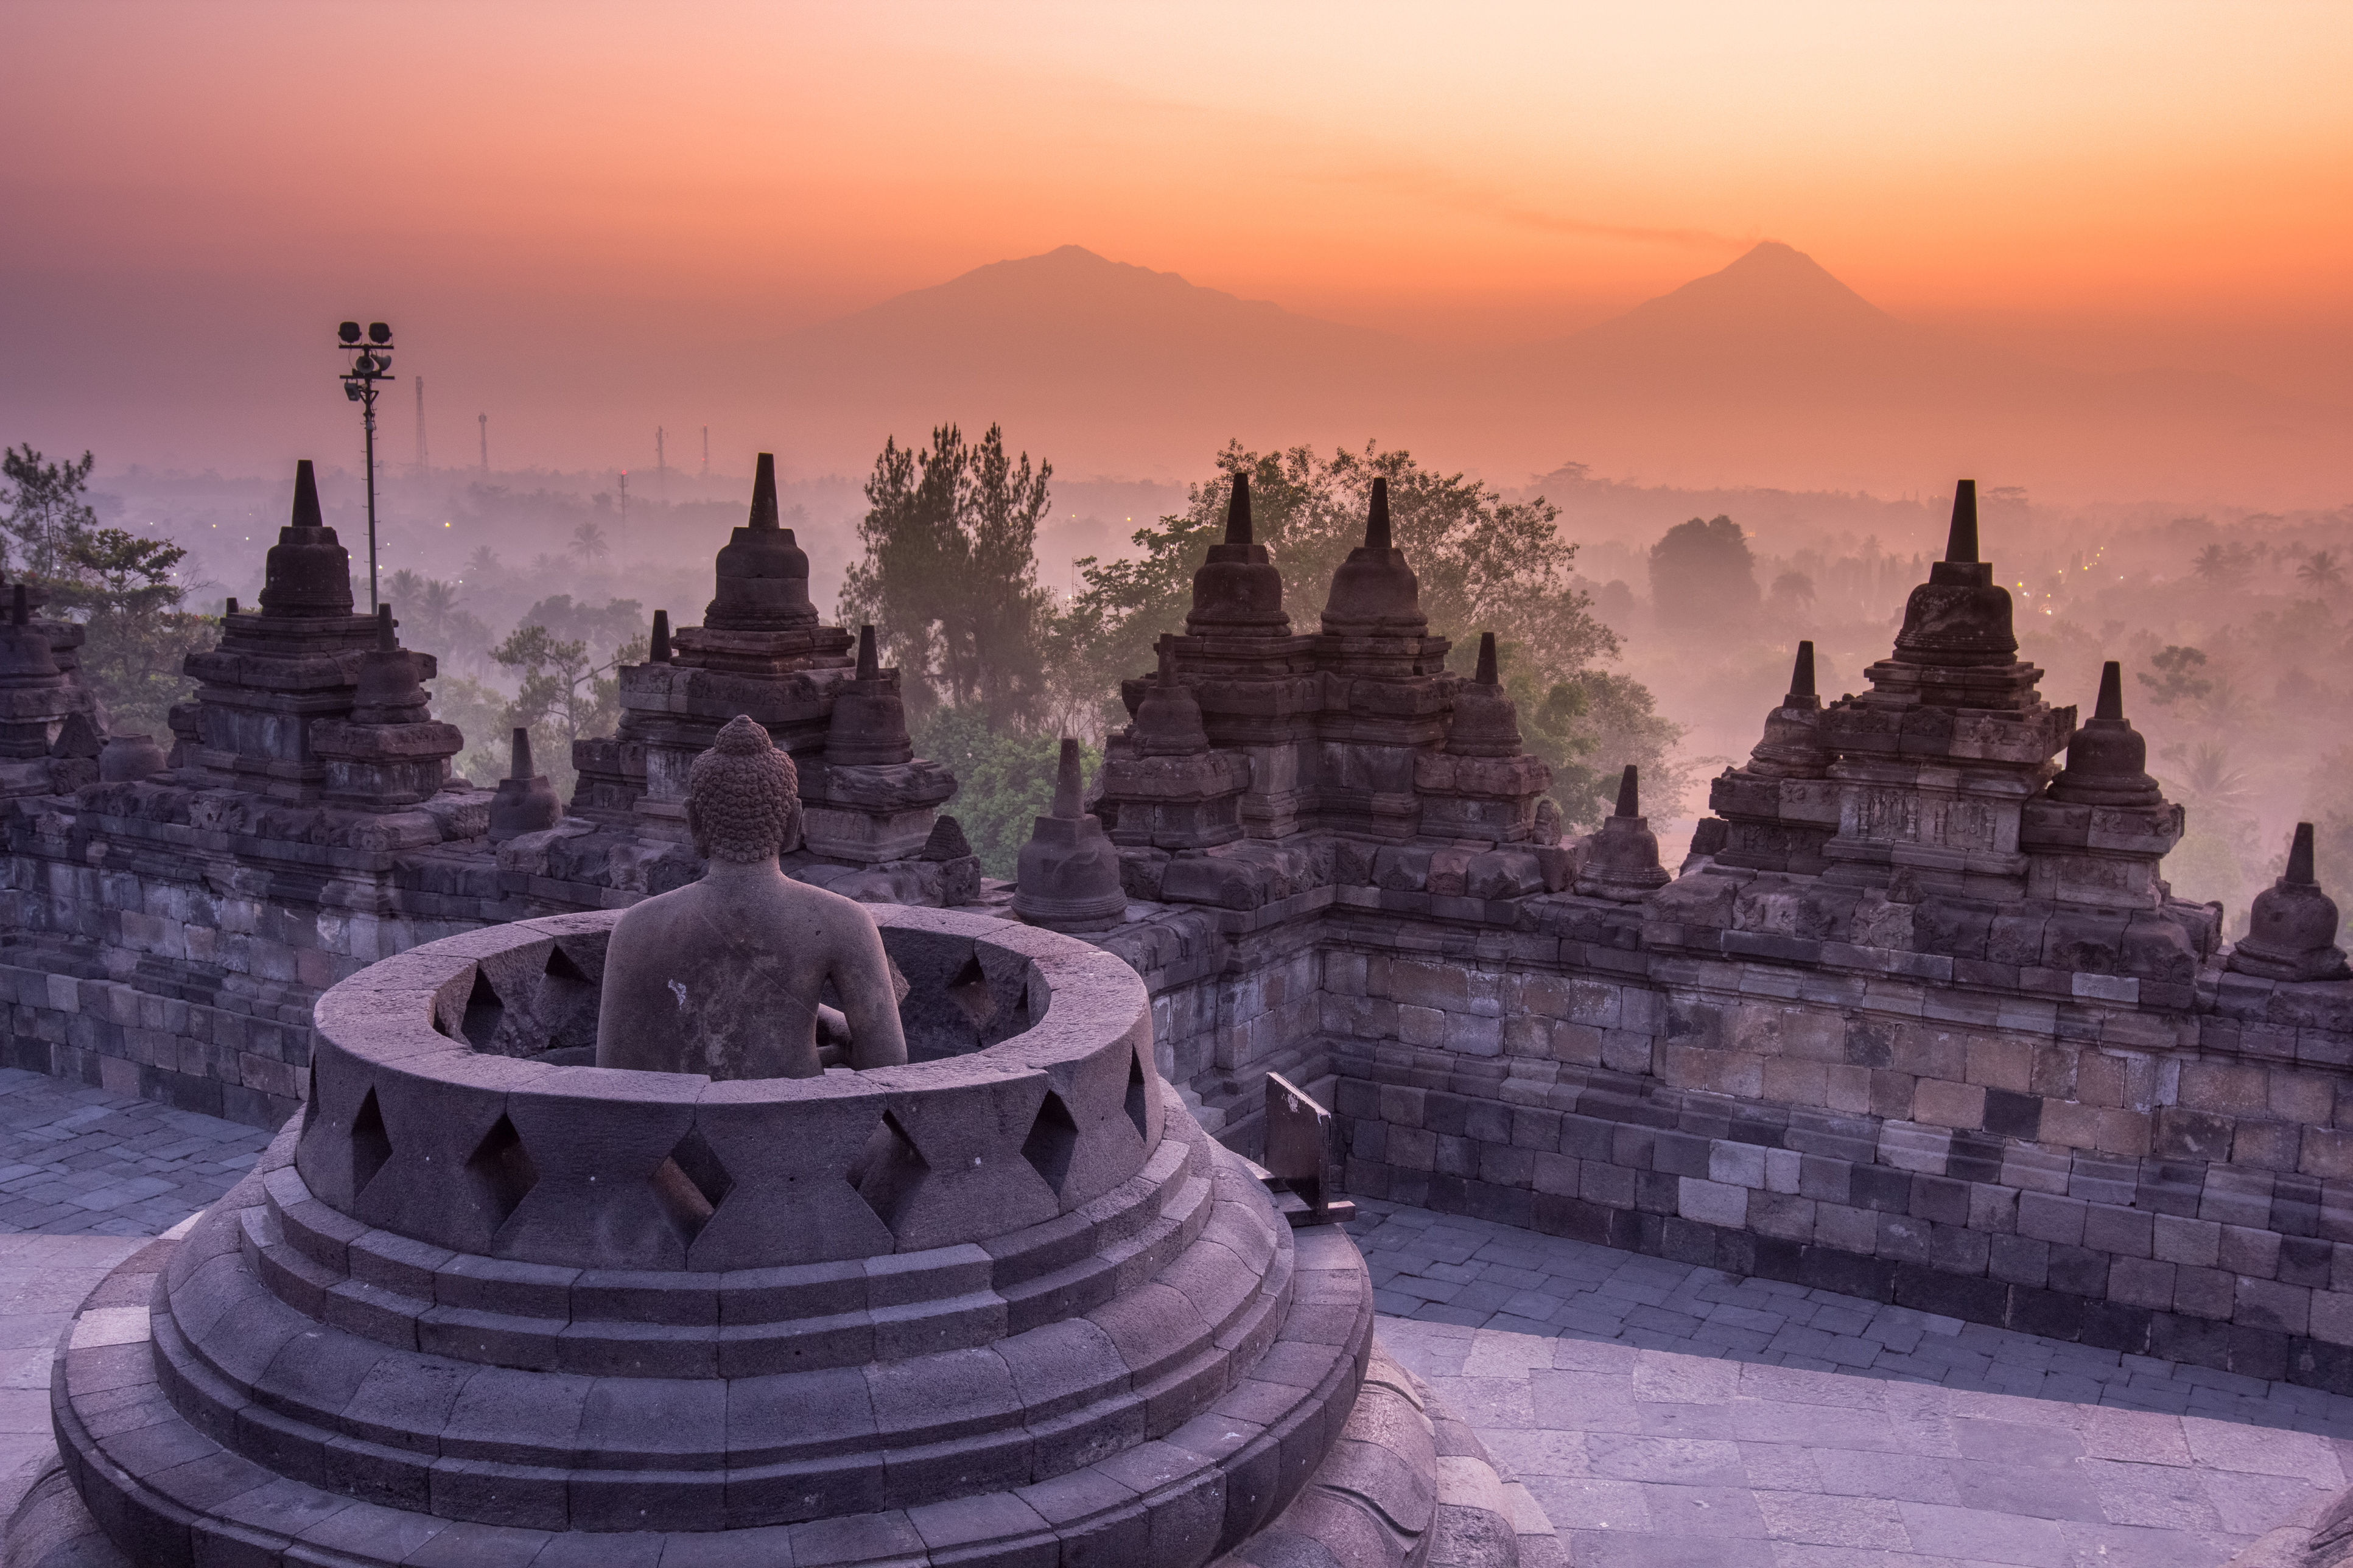 Check out: Yogyakarta, a cultural treasure trove in the heart of Central Java